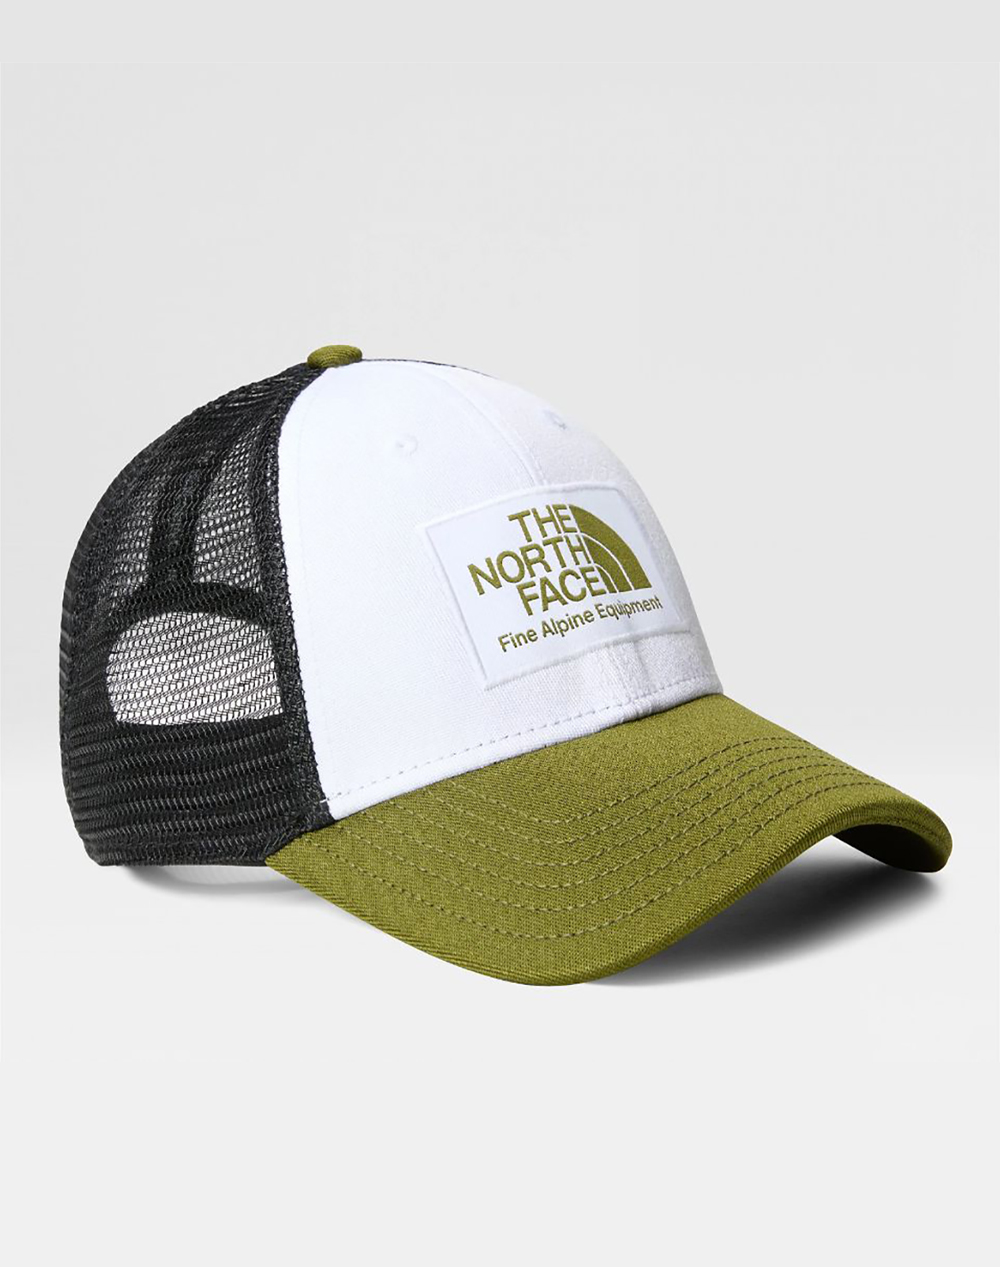 THE NORTH FACE MUDDER TRUCKER NF0A5FXA-NFZIV Olive